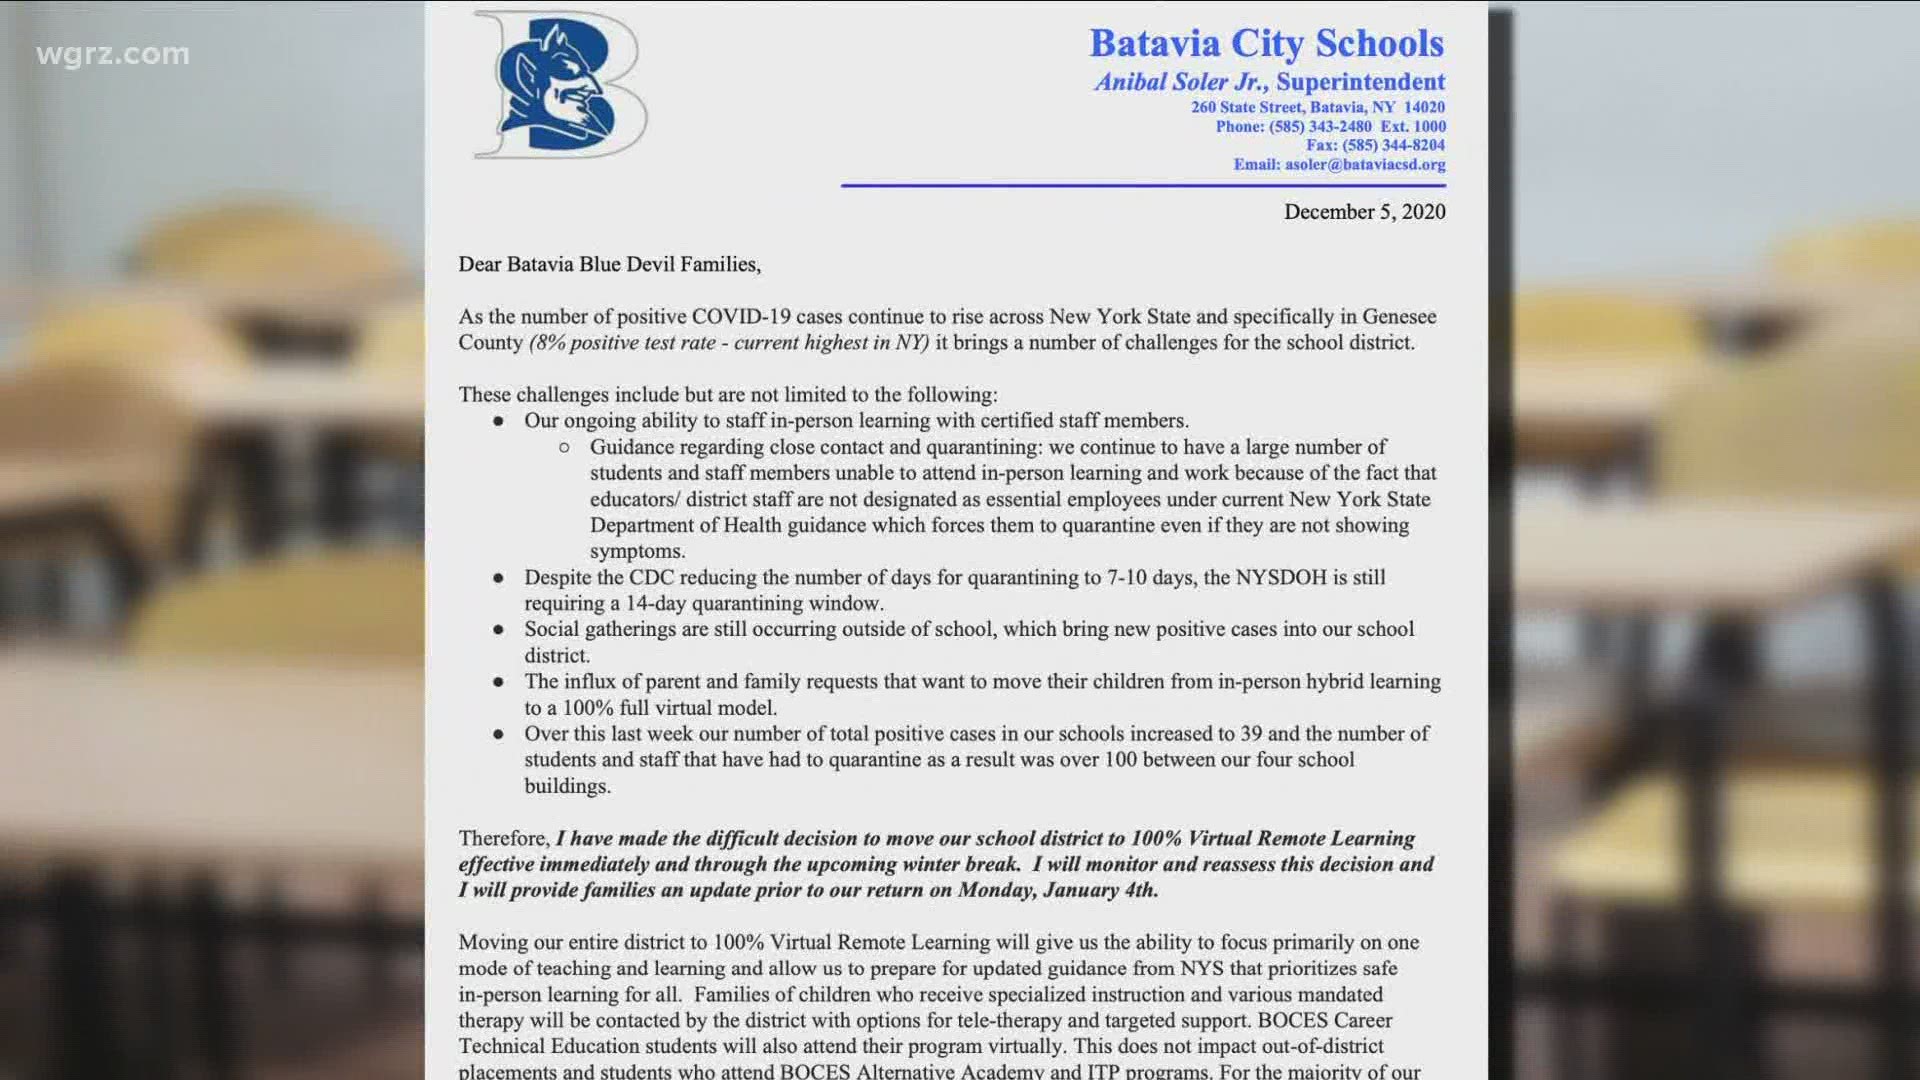 School's news release says increased number of positive tests has